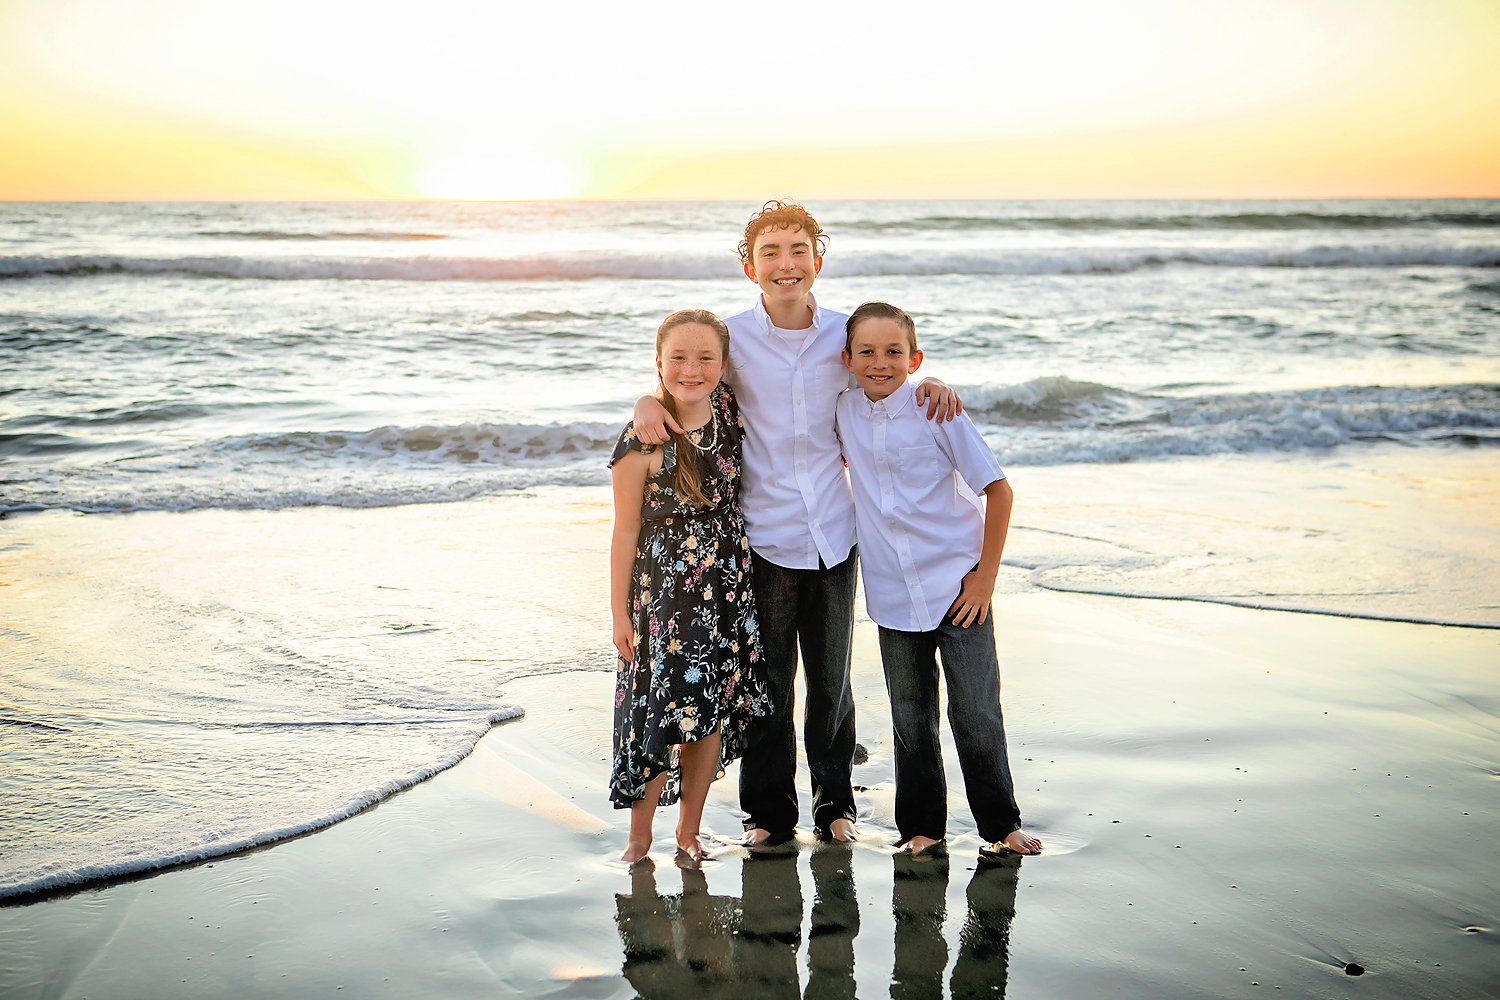 Photo by Carlsbad Family Beach Photographer. Photo may be of 3 people standing outdoors.